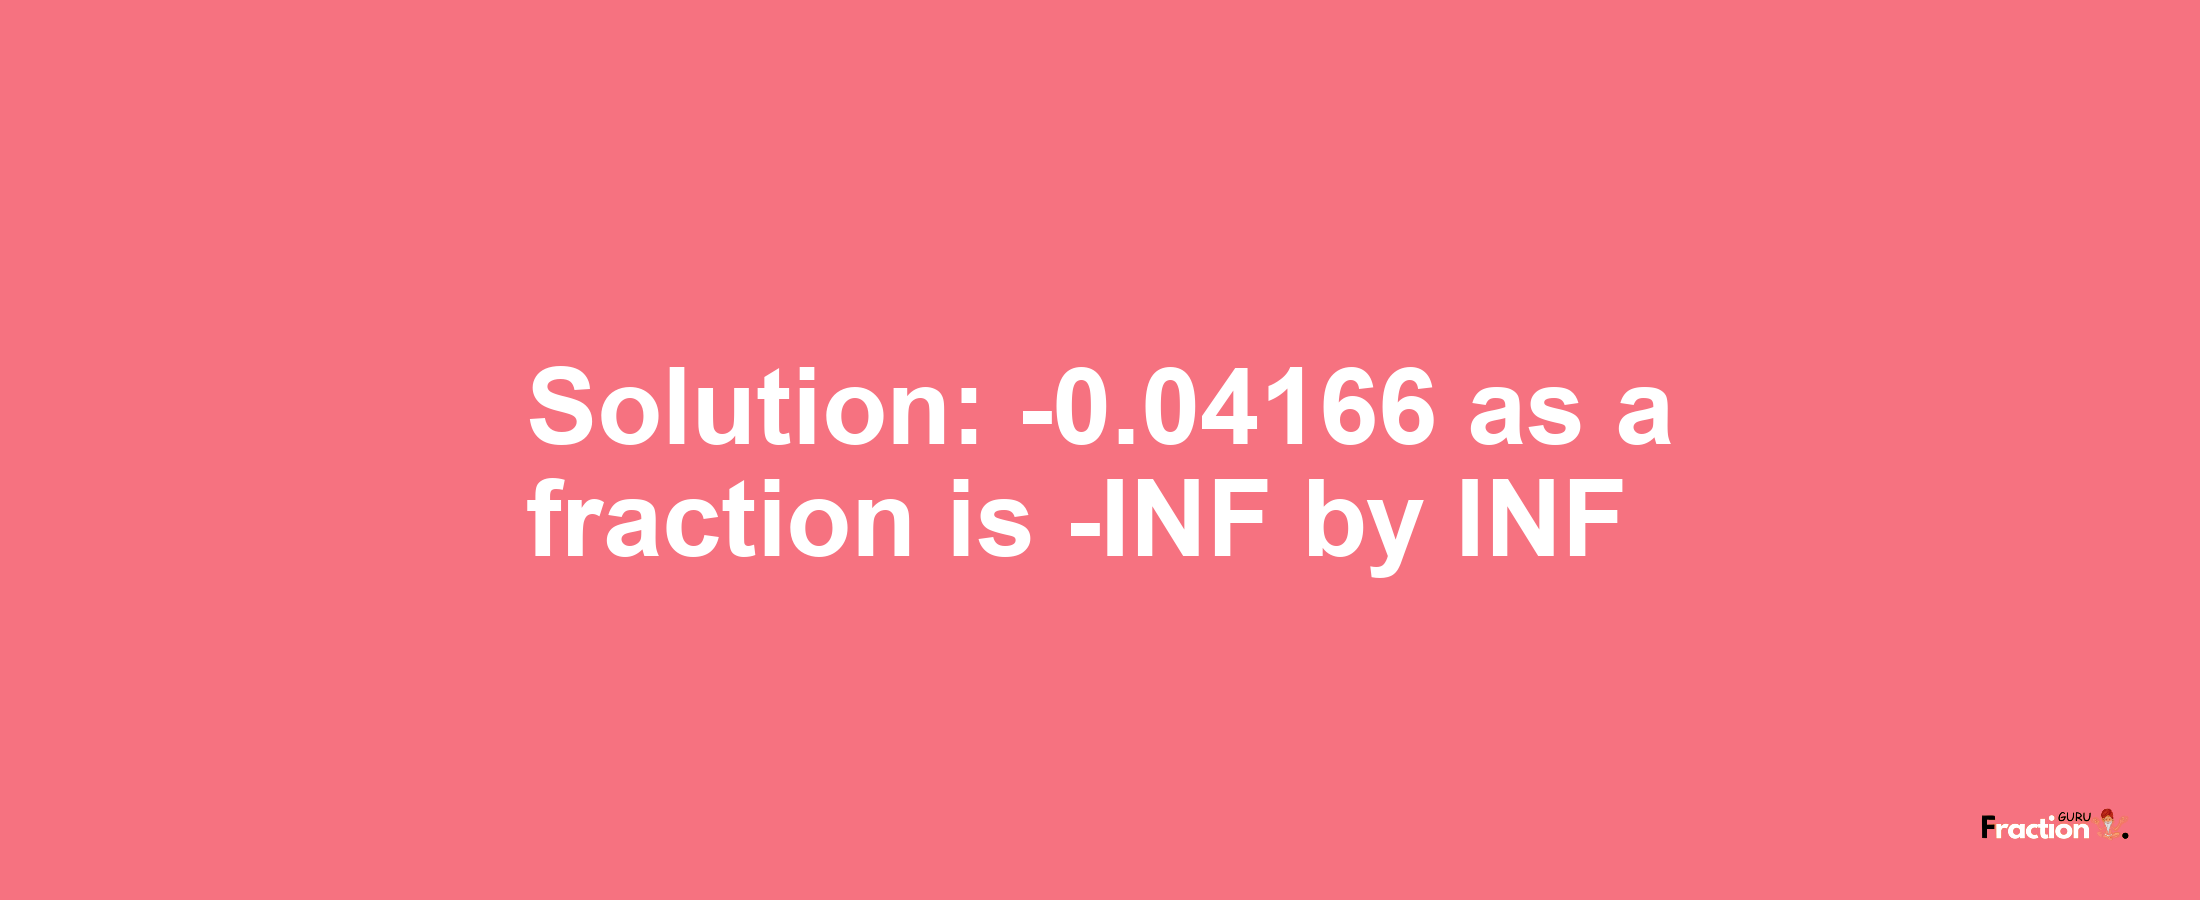 Solution:-0.04166 as a fraction is -INF/INF